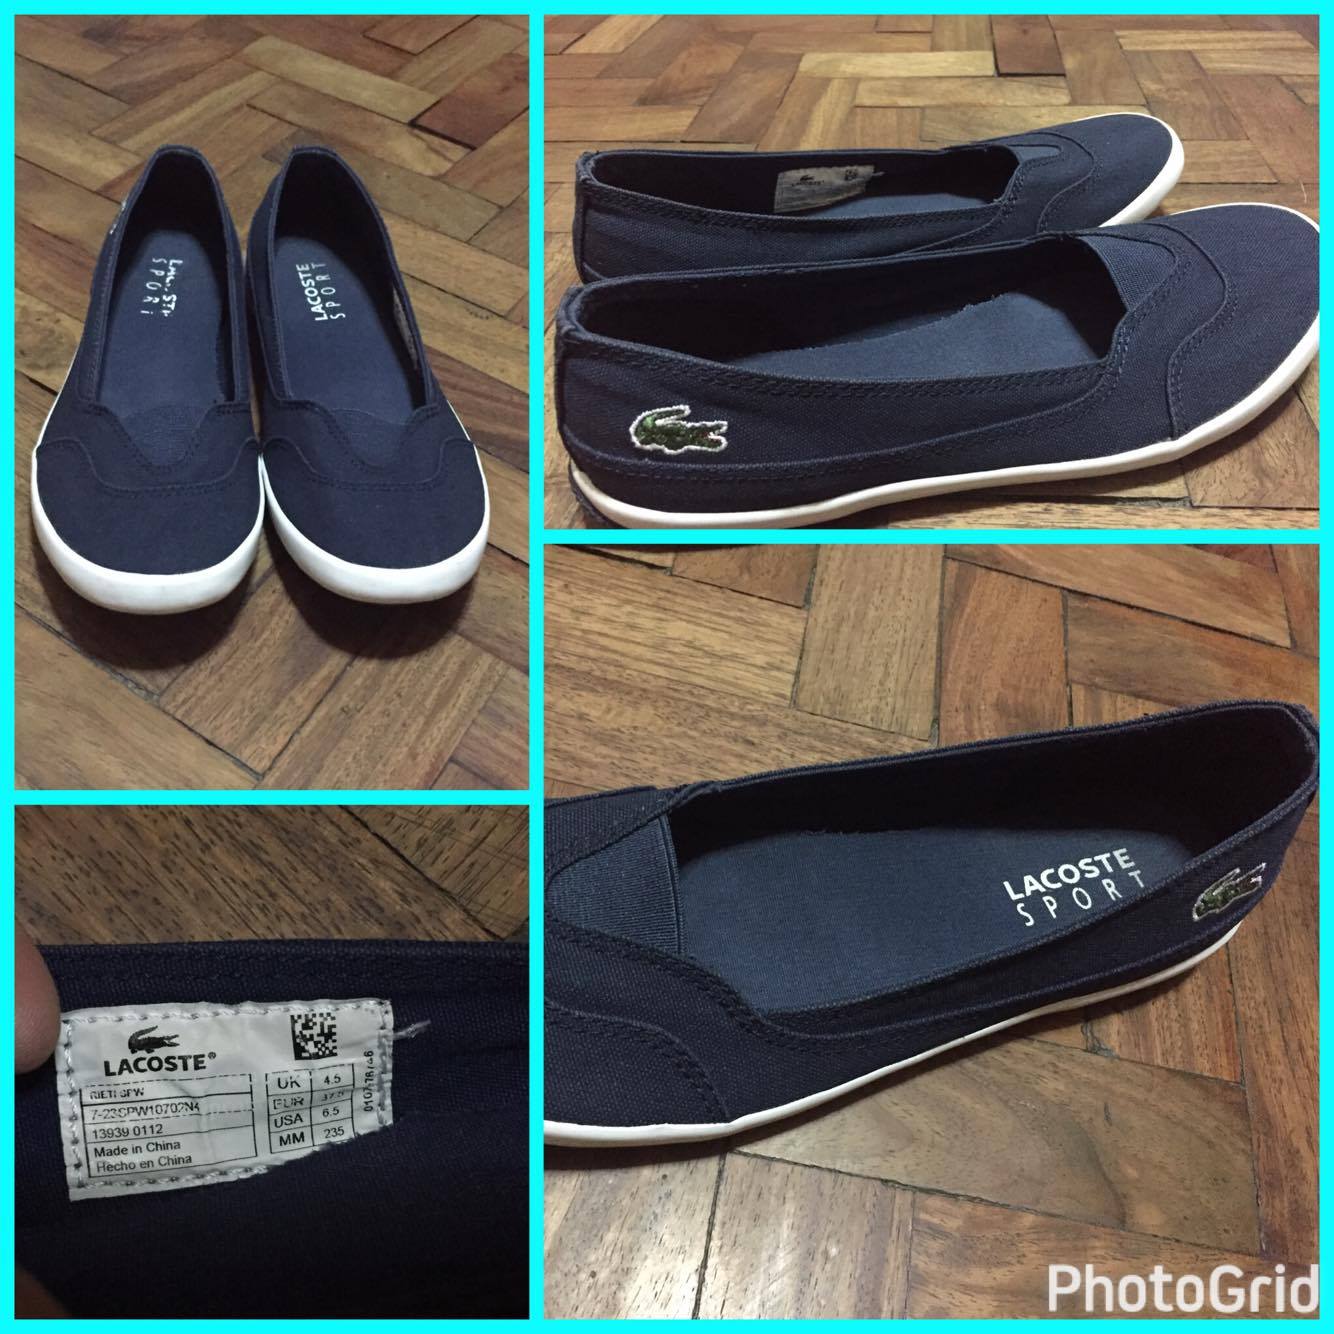 lacoste made in china authentic